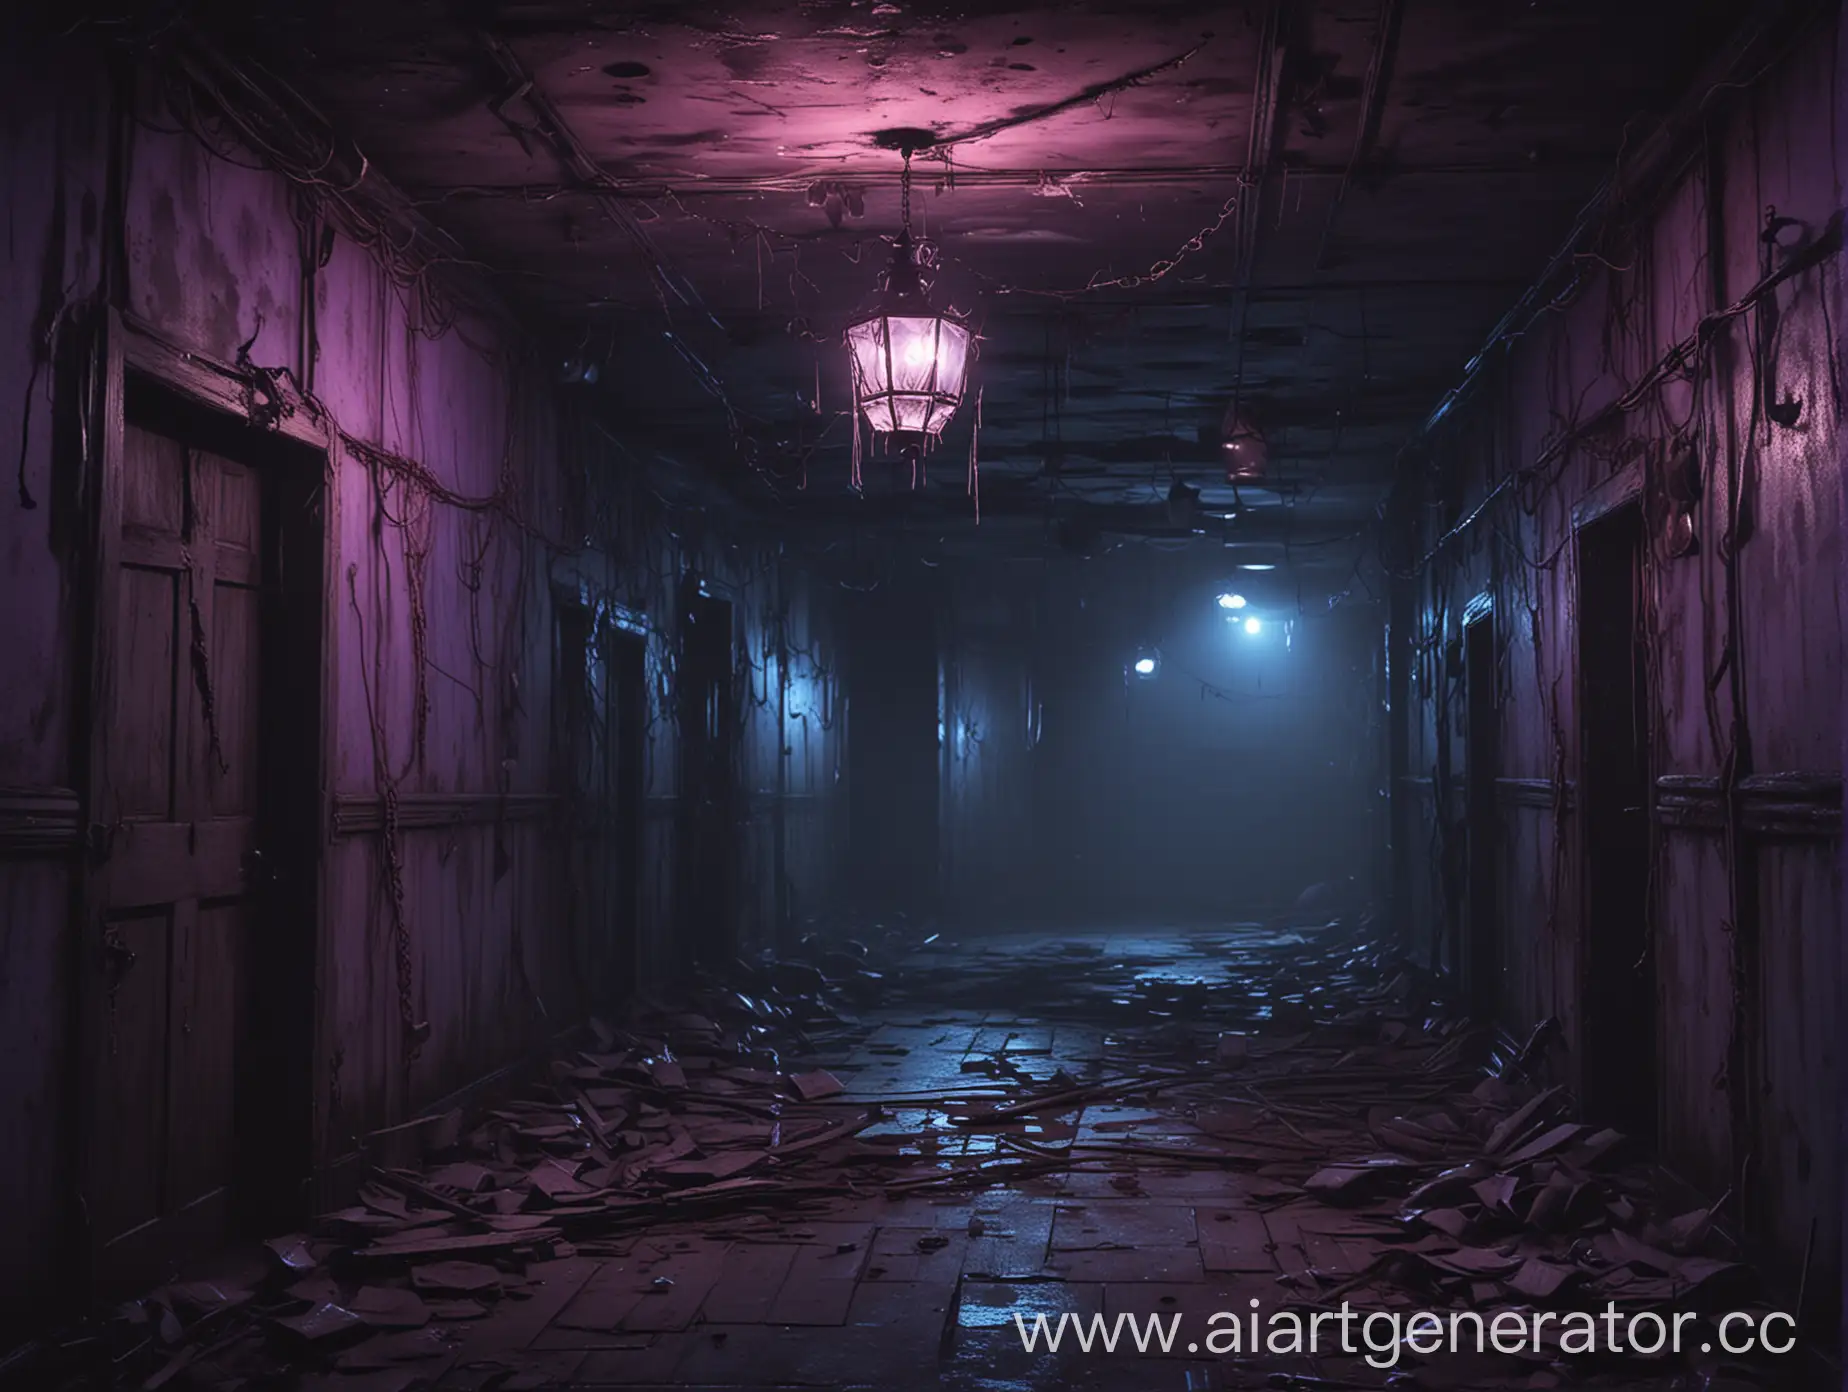 Create a background image for a song titled 'Eternal Night' inspired by Five Nights at Freddy's. The scene should be dark and eerie, set in the haunted hallways of a decrepit pizzeria. Include shadows of animatronic characters like Foxy lurking in the background. Use a mix of blue and purple hues to create a mysterious and ominous atmosphere. The style should be a blend of Electro House and baroque elements, with a sense of motion and energy.